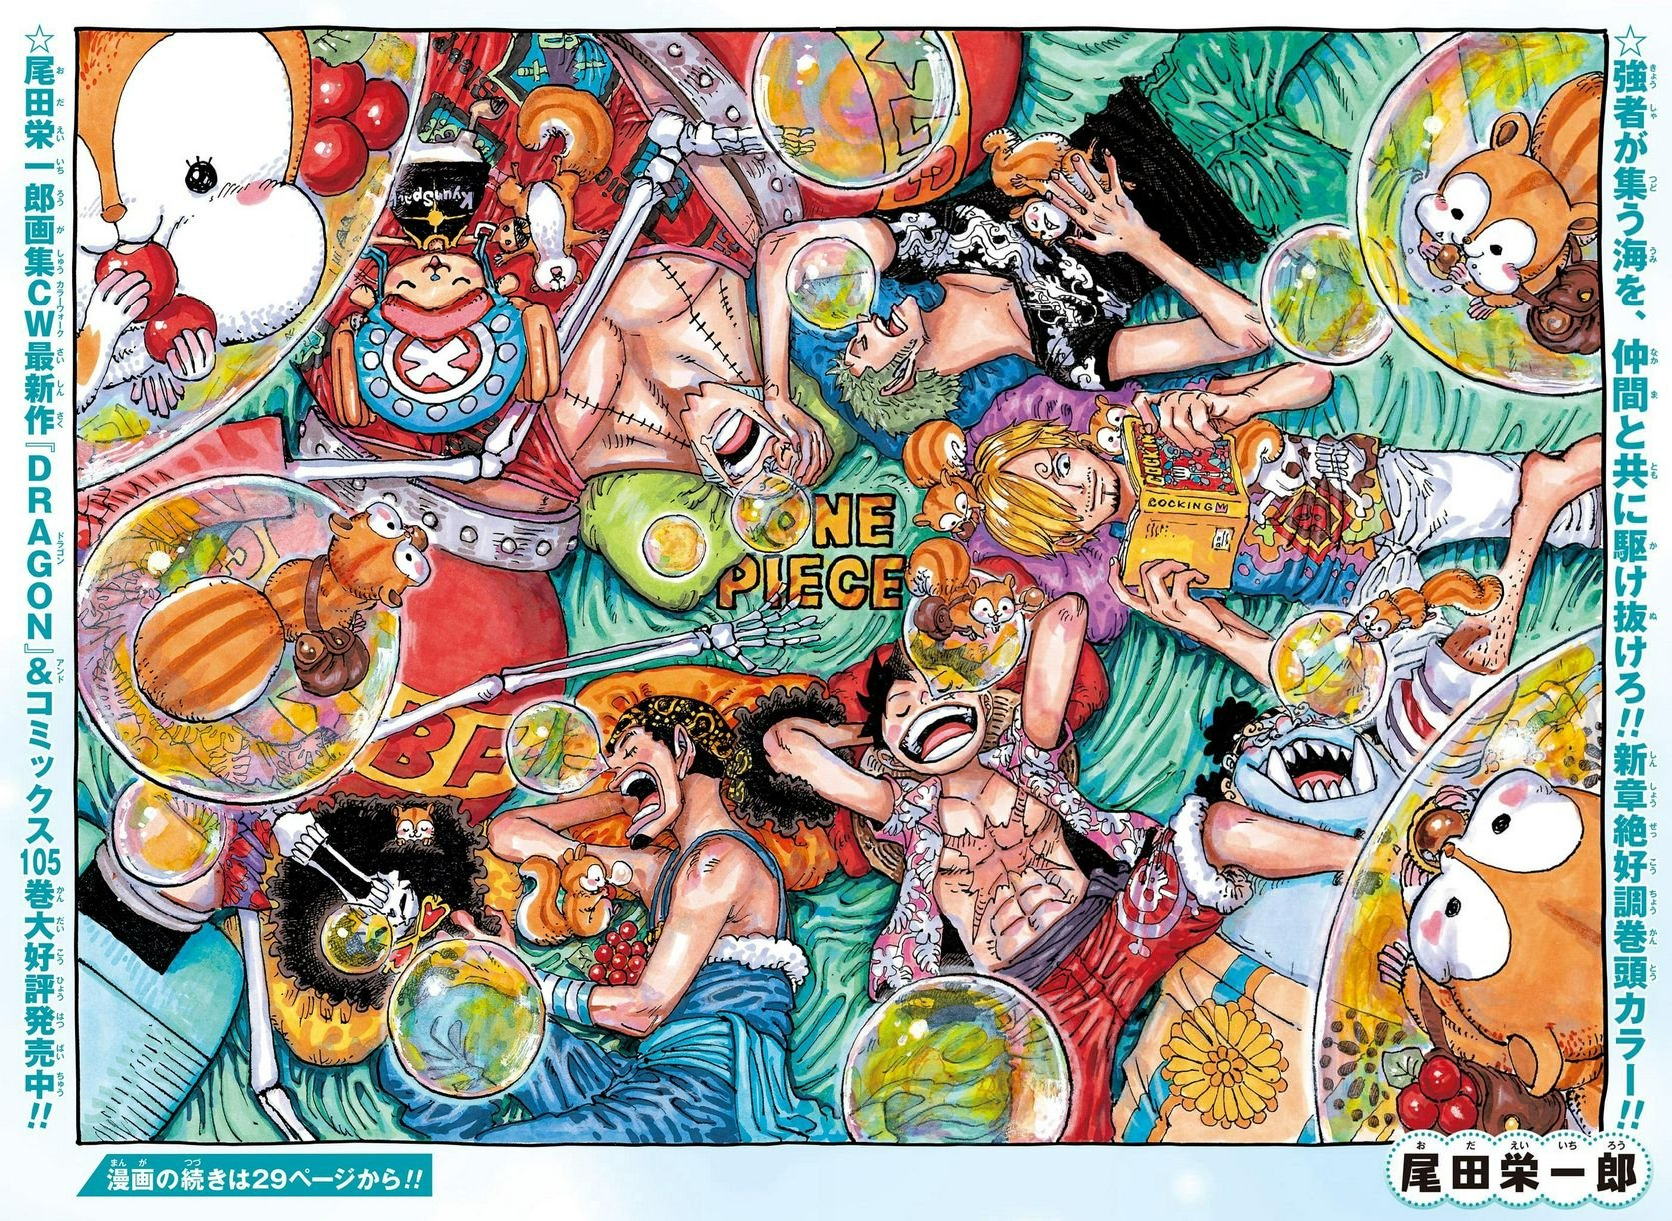 One Piece Chapter 1061: Finally Straw Hats are reaching a new island called  'Egg head